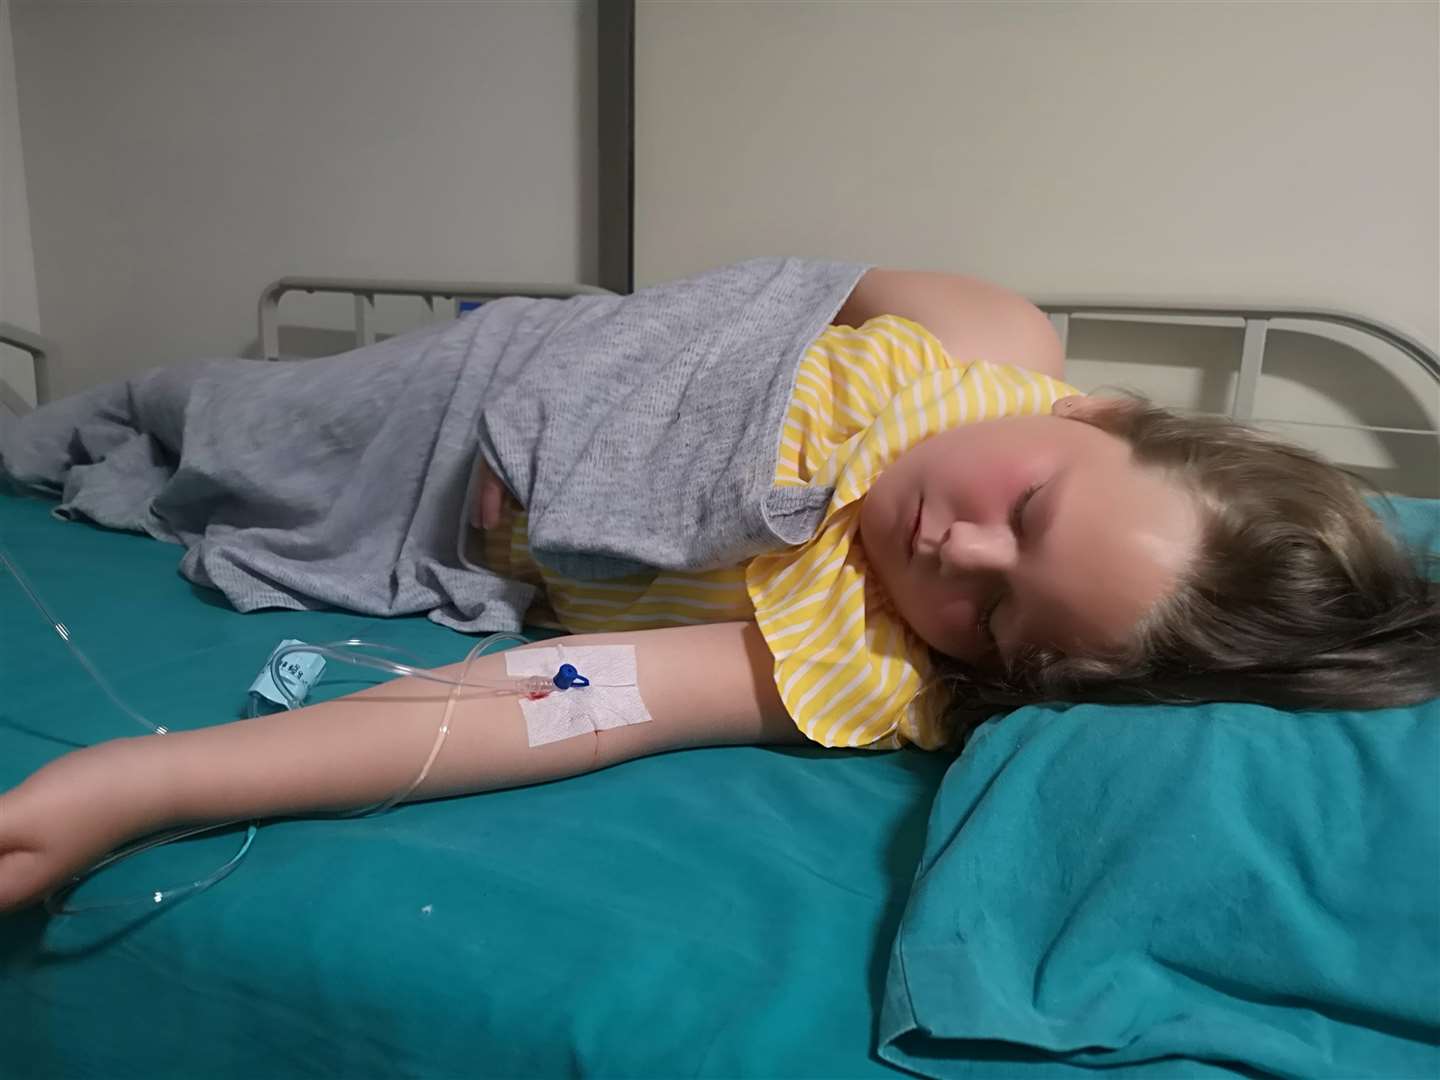 The nine-year-old was put on a drip by doctors at Ahu Hastanesi Hospital in Turkey